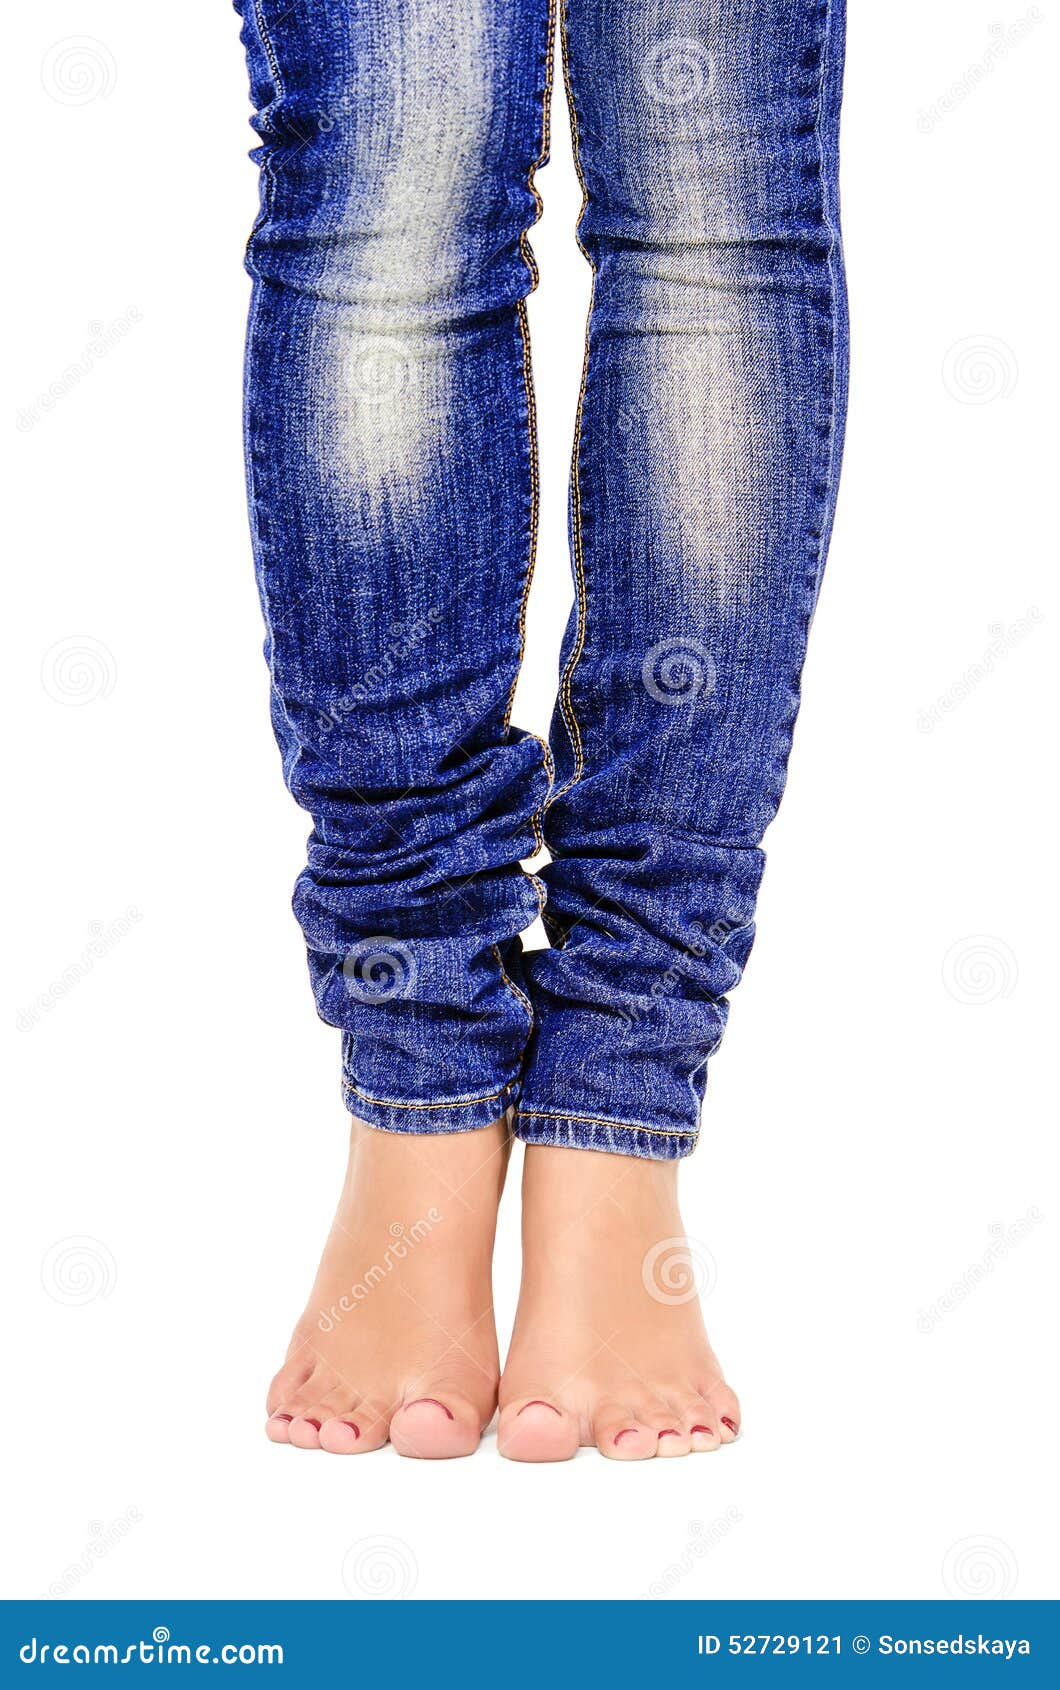 Female feet in jeans stock image. Image of human, groomed - 52729121